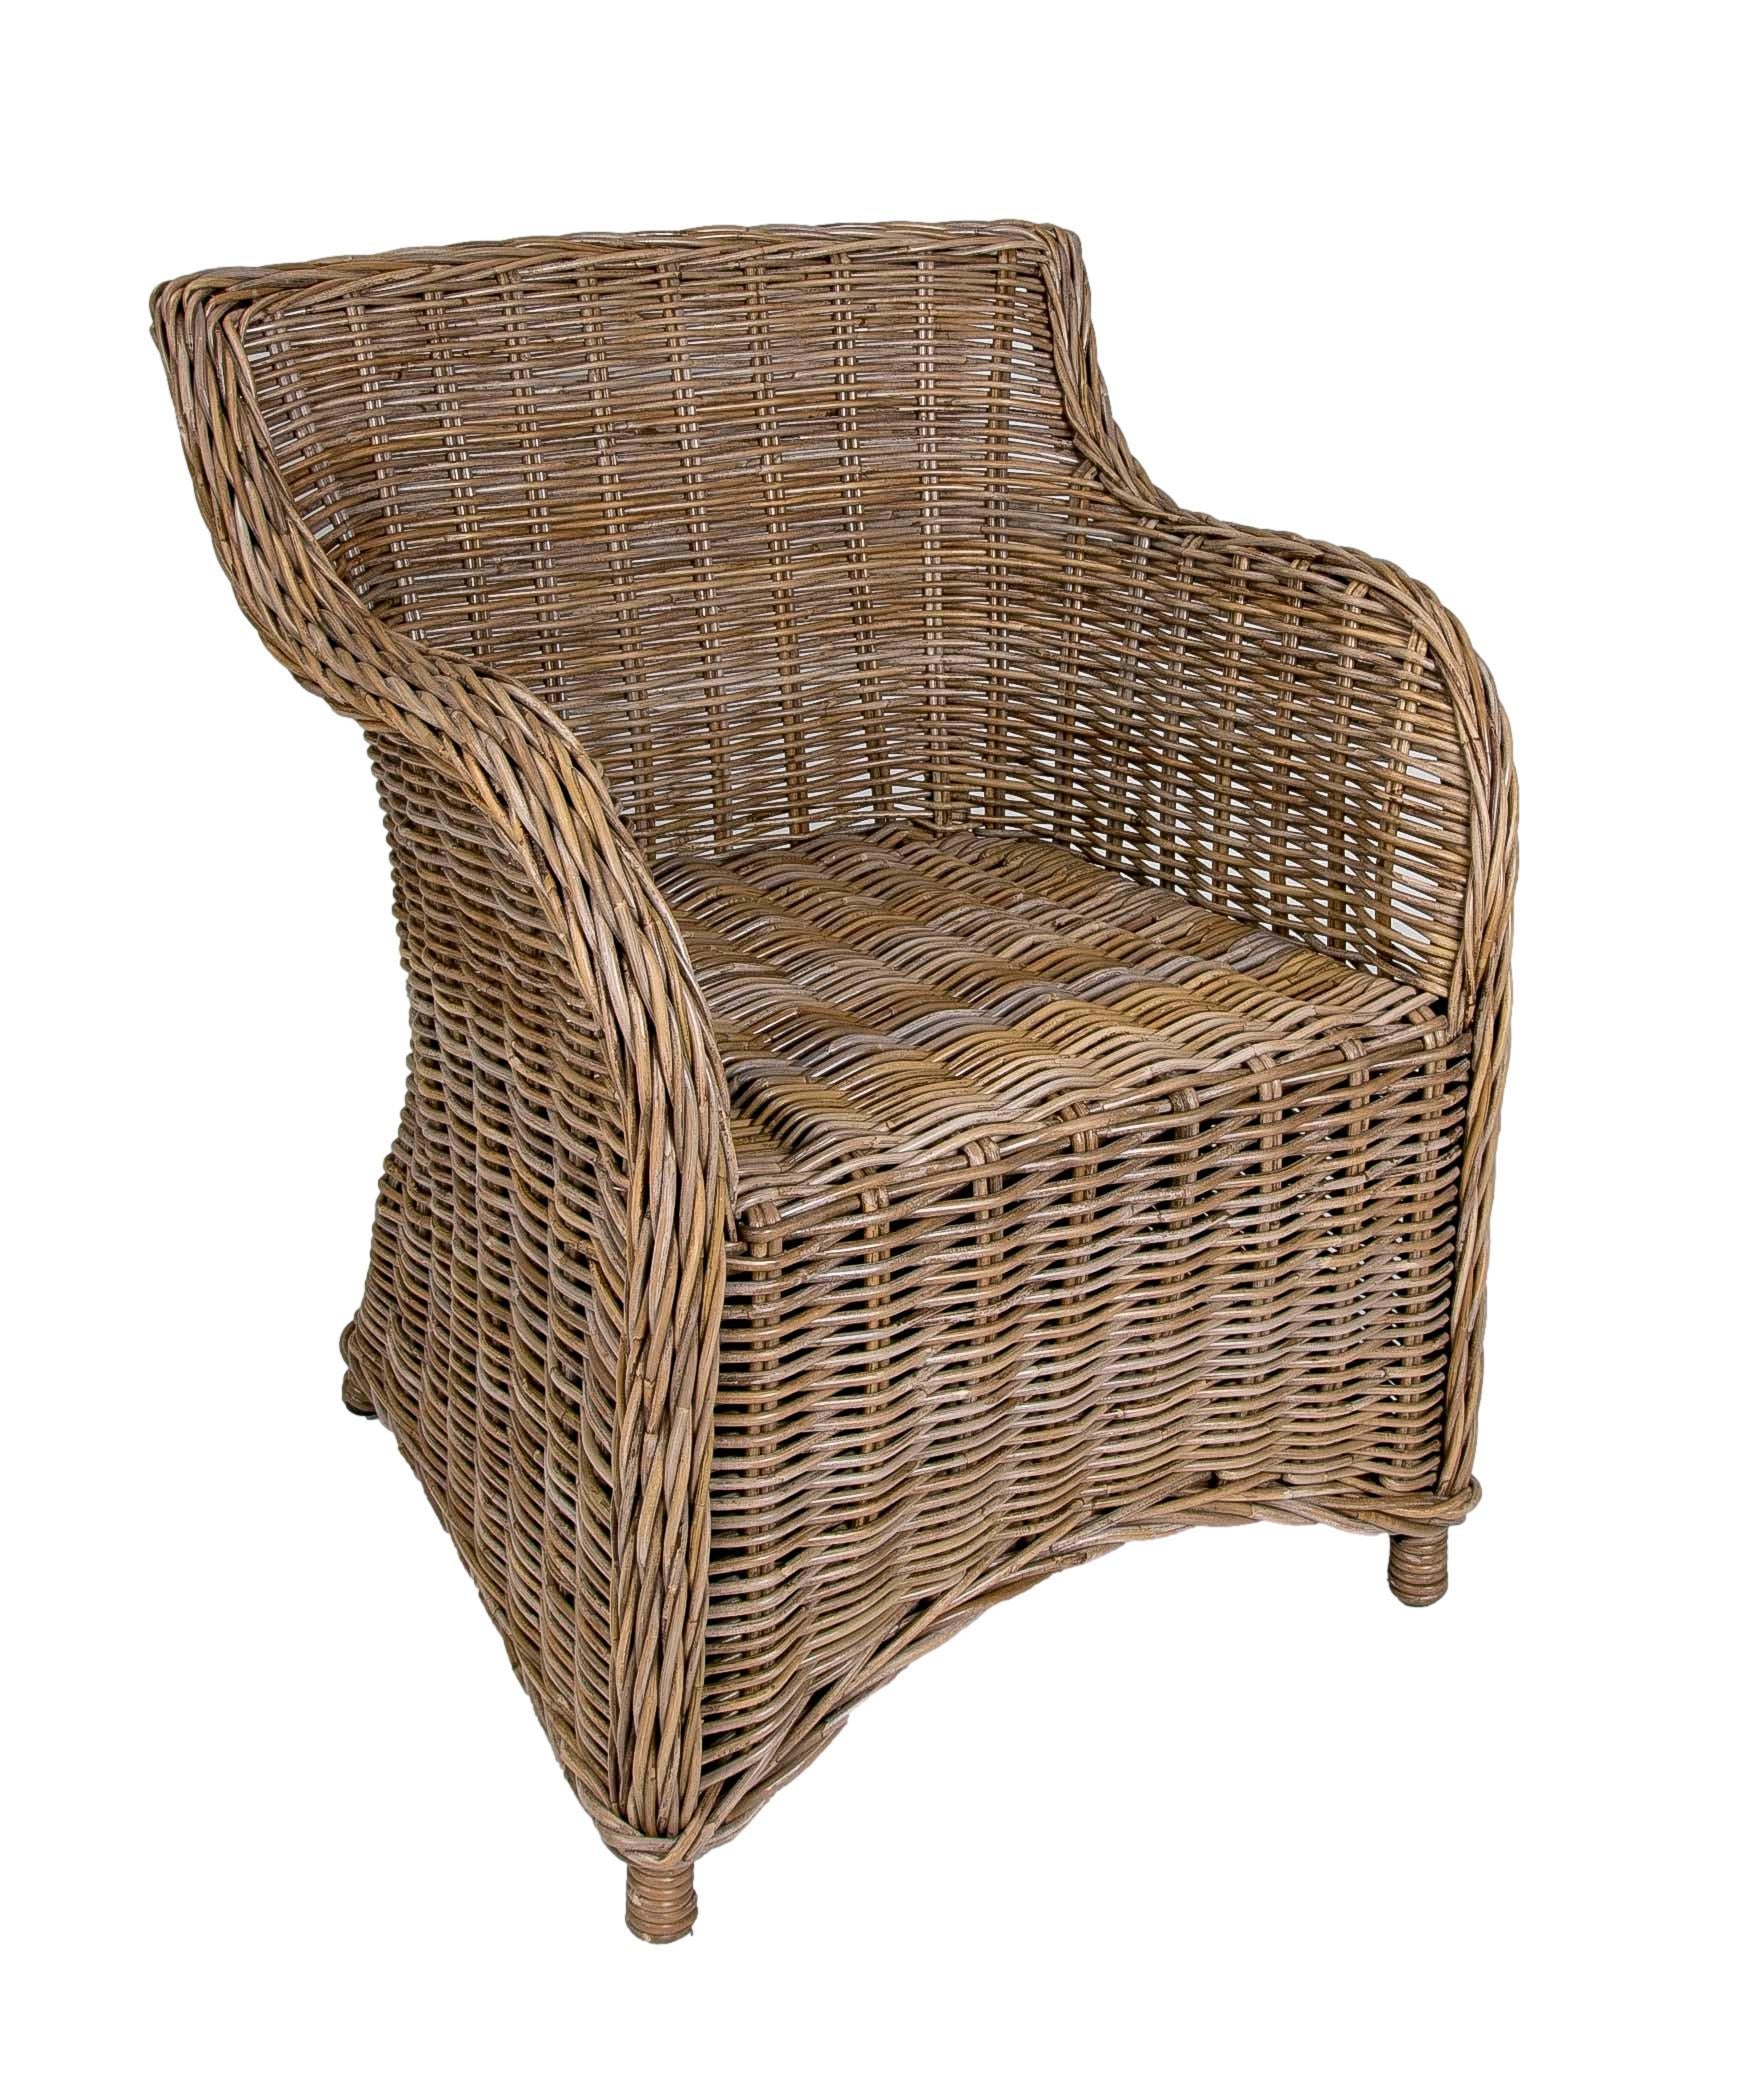 Contemporary  Rattan Garden Chair with Cushion in Greyish Tone For Sale